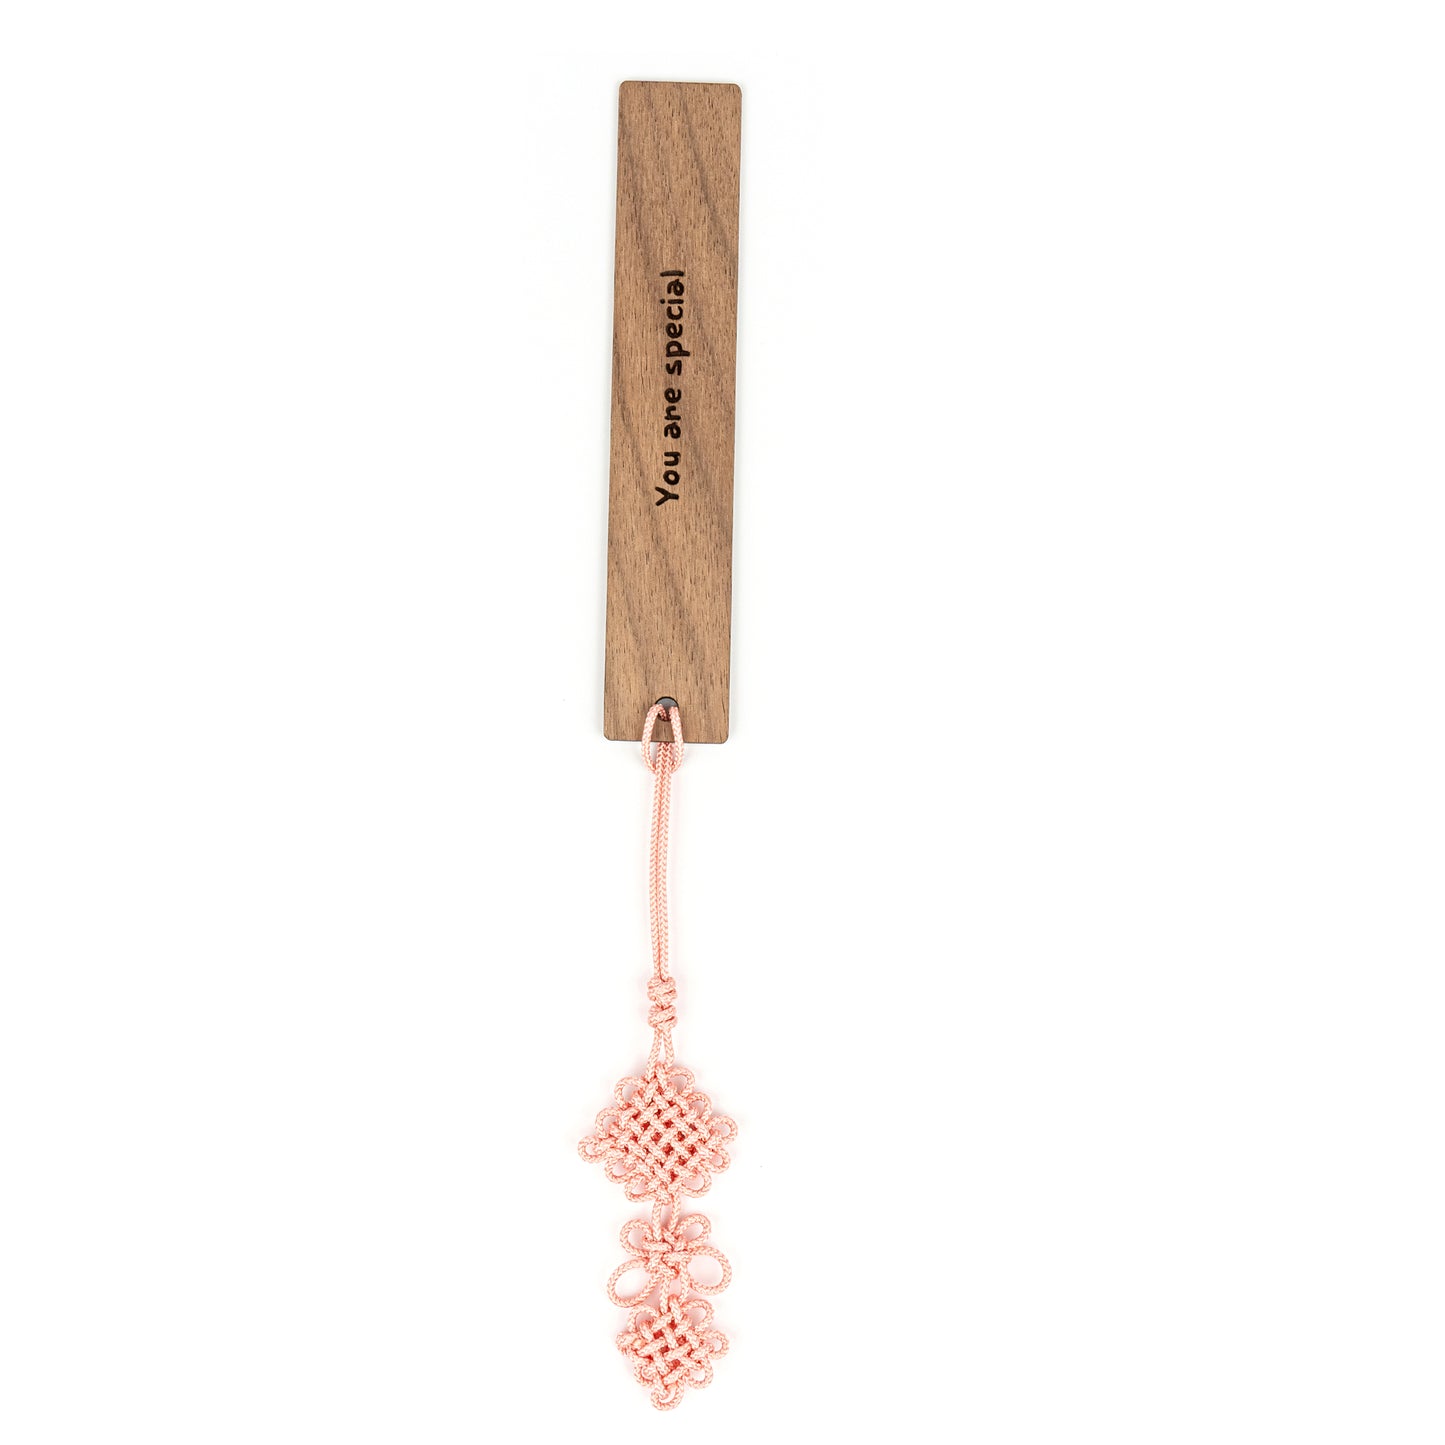 "You Are Special" Engraved Wooden Bookmark